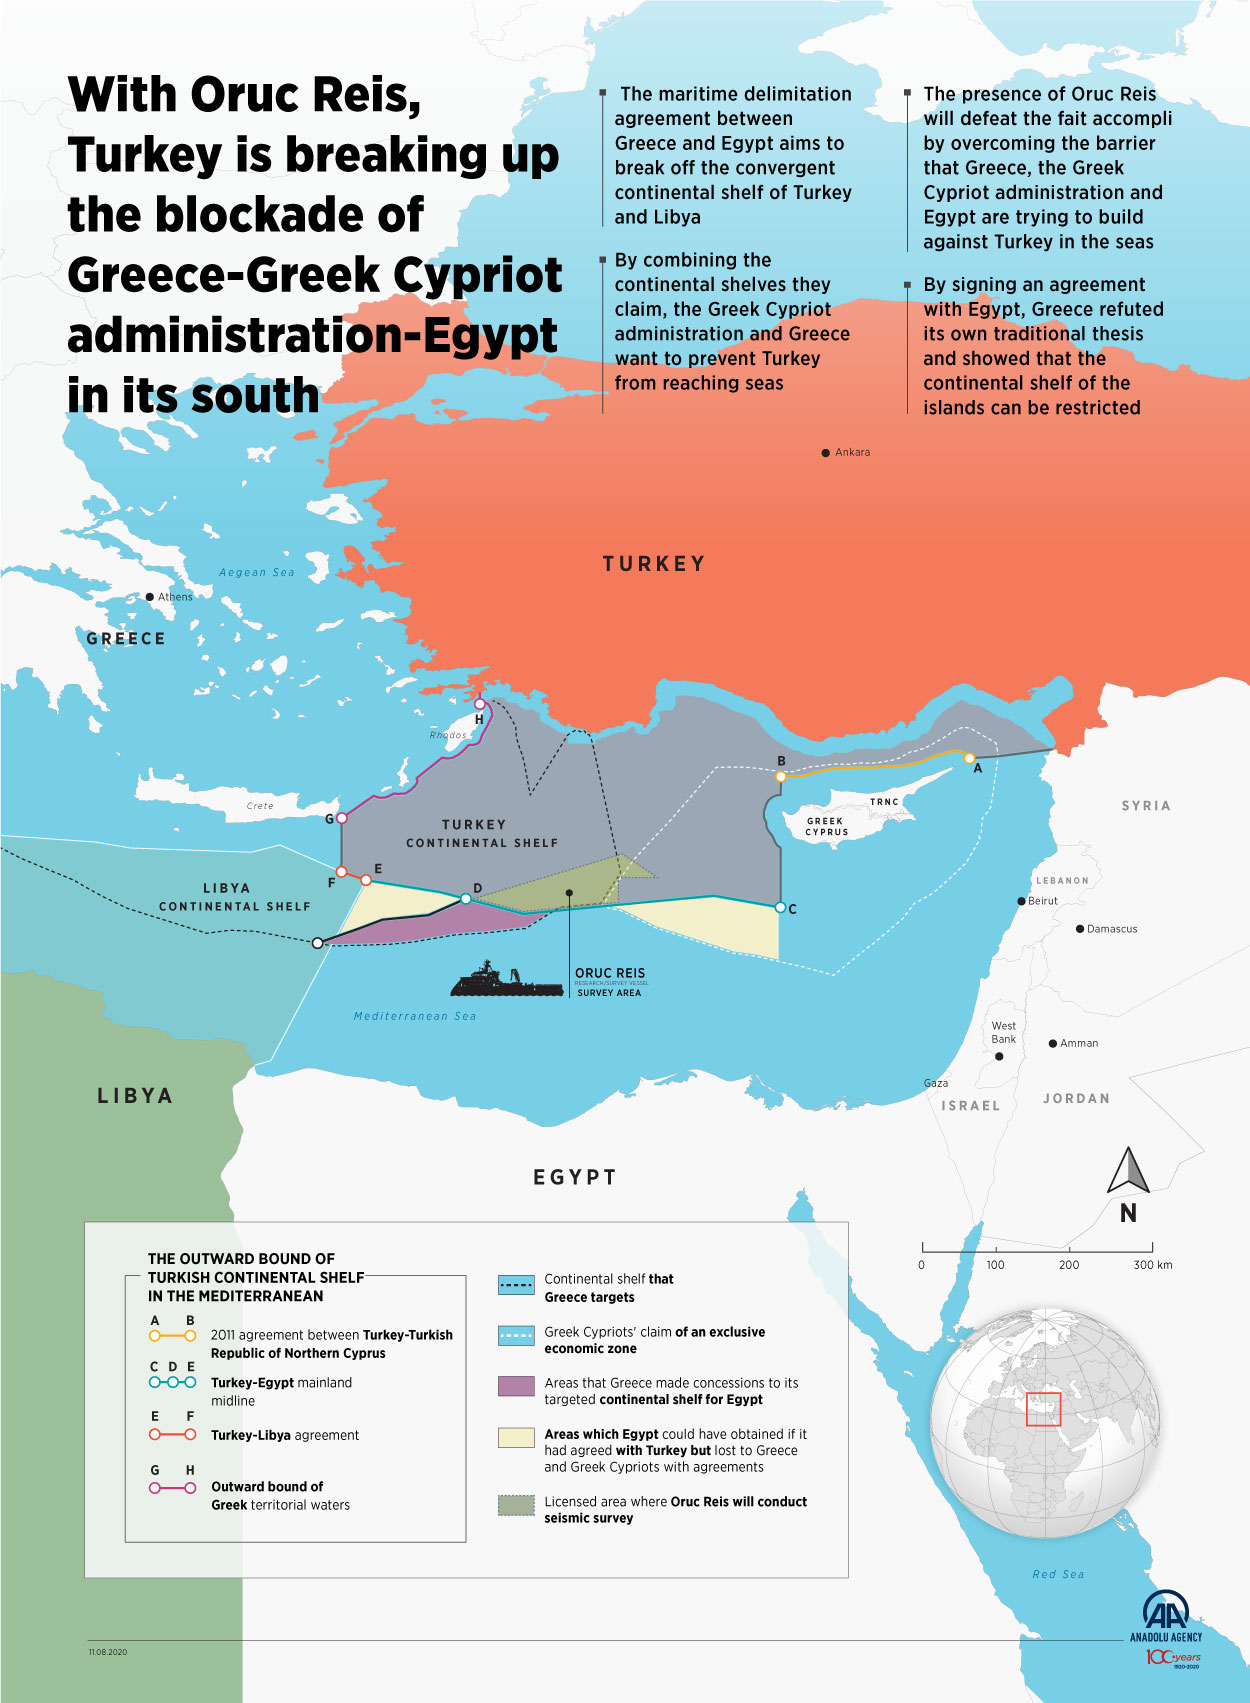 With Oruc Reis, Turkey is breaking up the blockade of Greece -Greek Cypriot administration-Egypt in its south